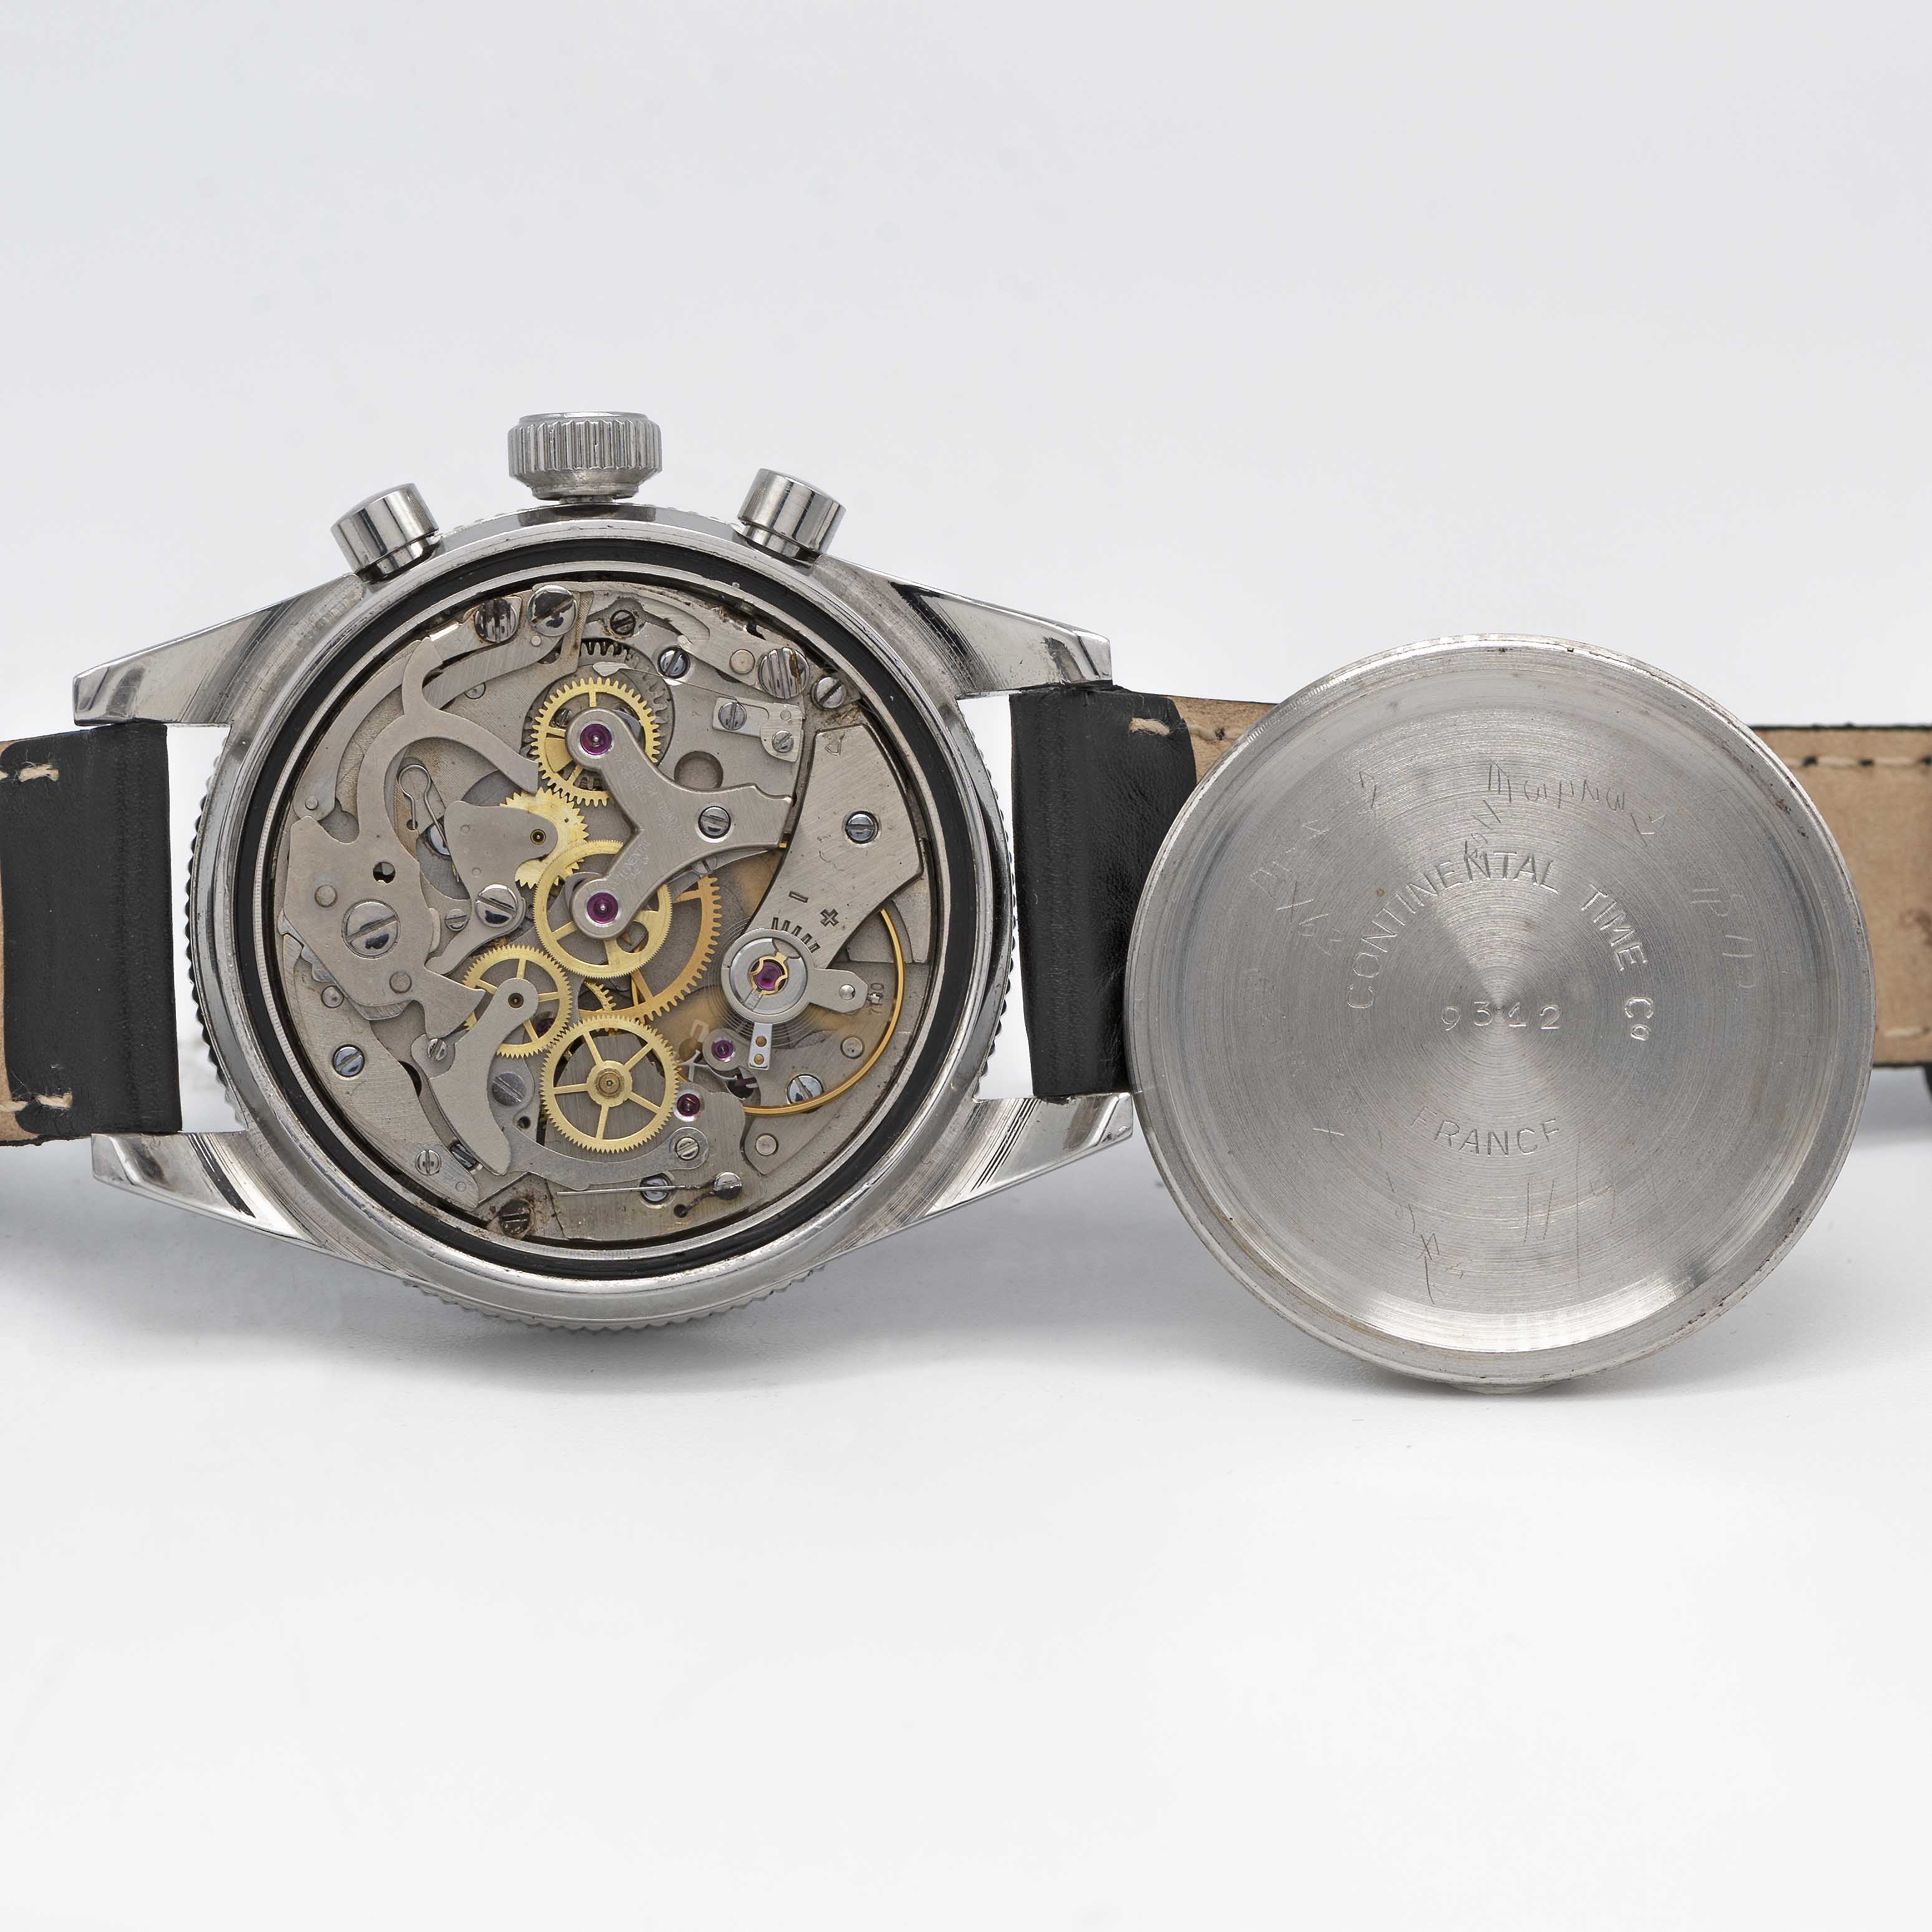 A GENTLEMAN'S STAINLESS STEEL LEJOUR RALLY CHRONOGRAPH WRIST WATCH CIRCA 1969 Movement: 17J, - Image 6 of 8